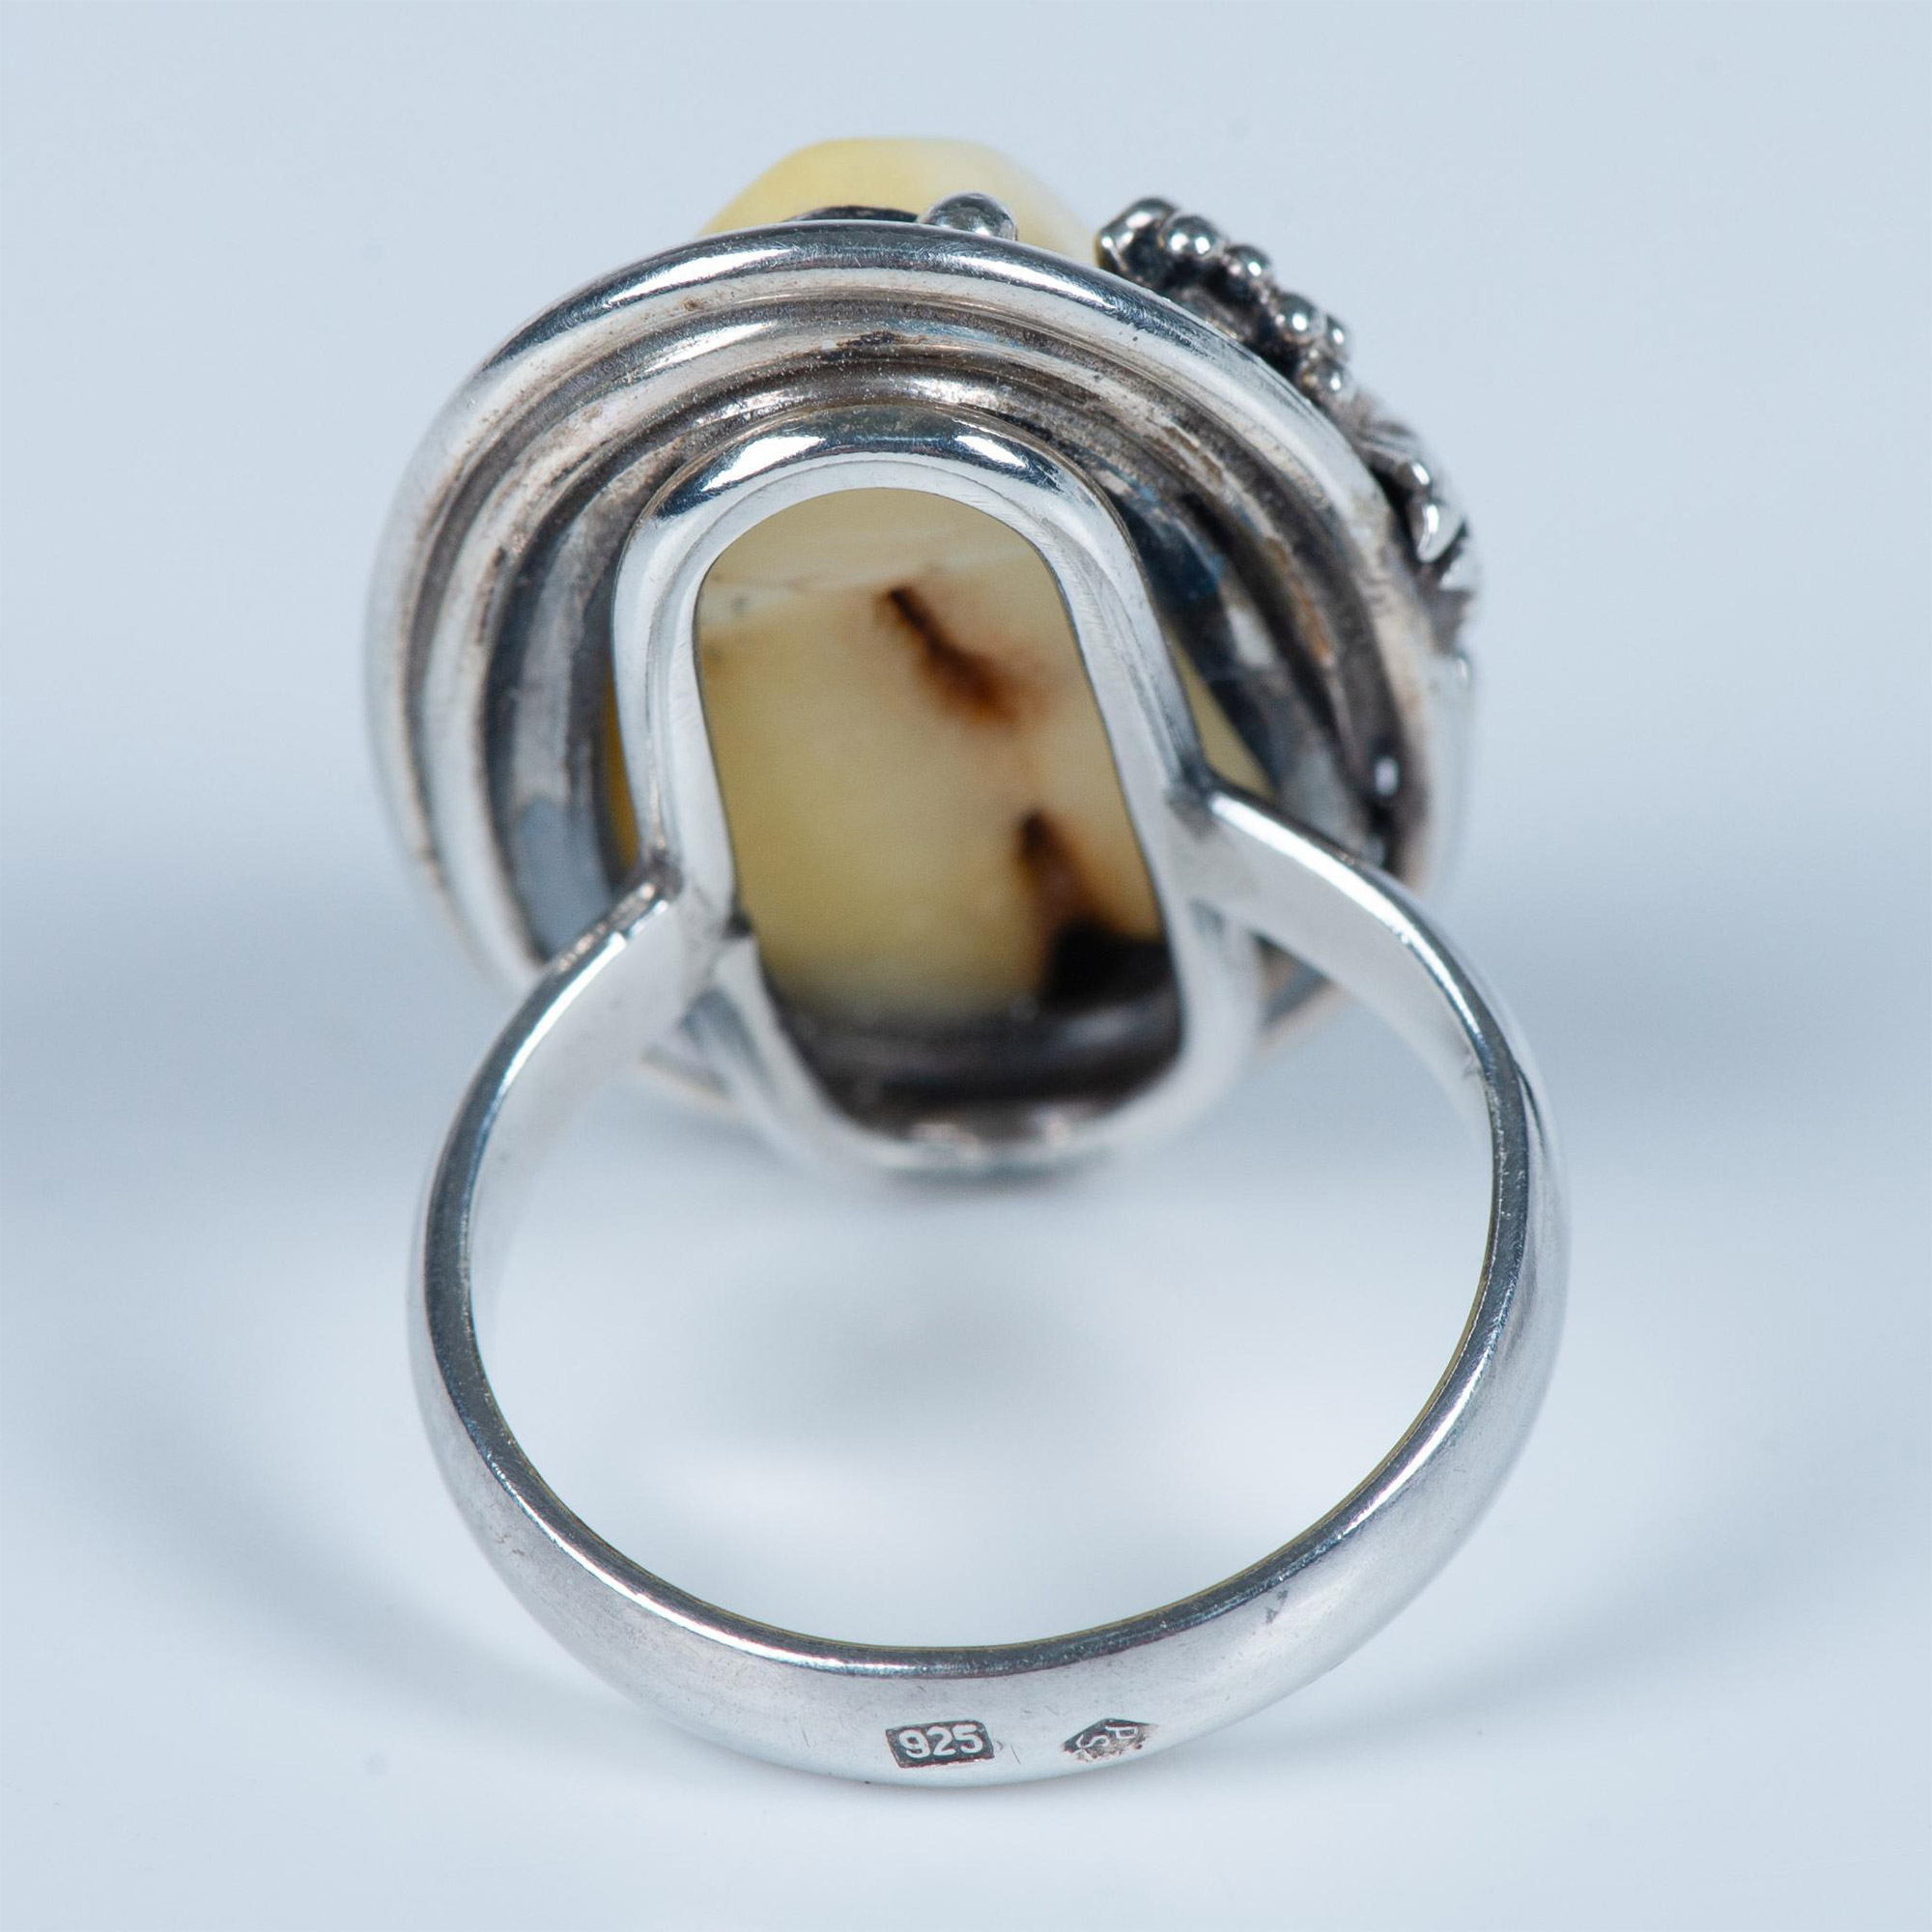 Stunning Butterscotch Baltic Amber and Sterling Silver Ring - Image 4 of 7